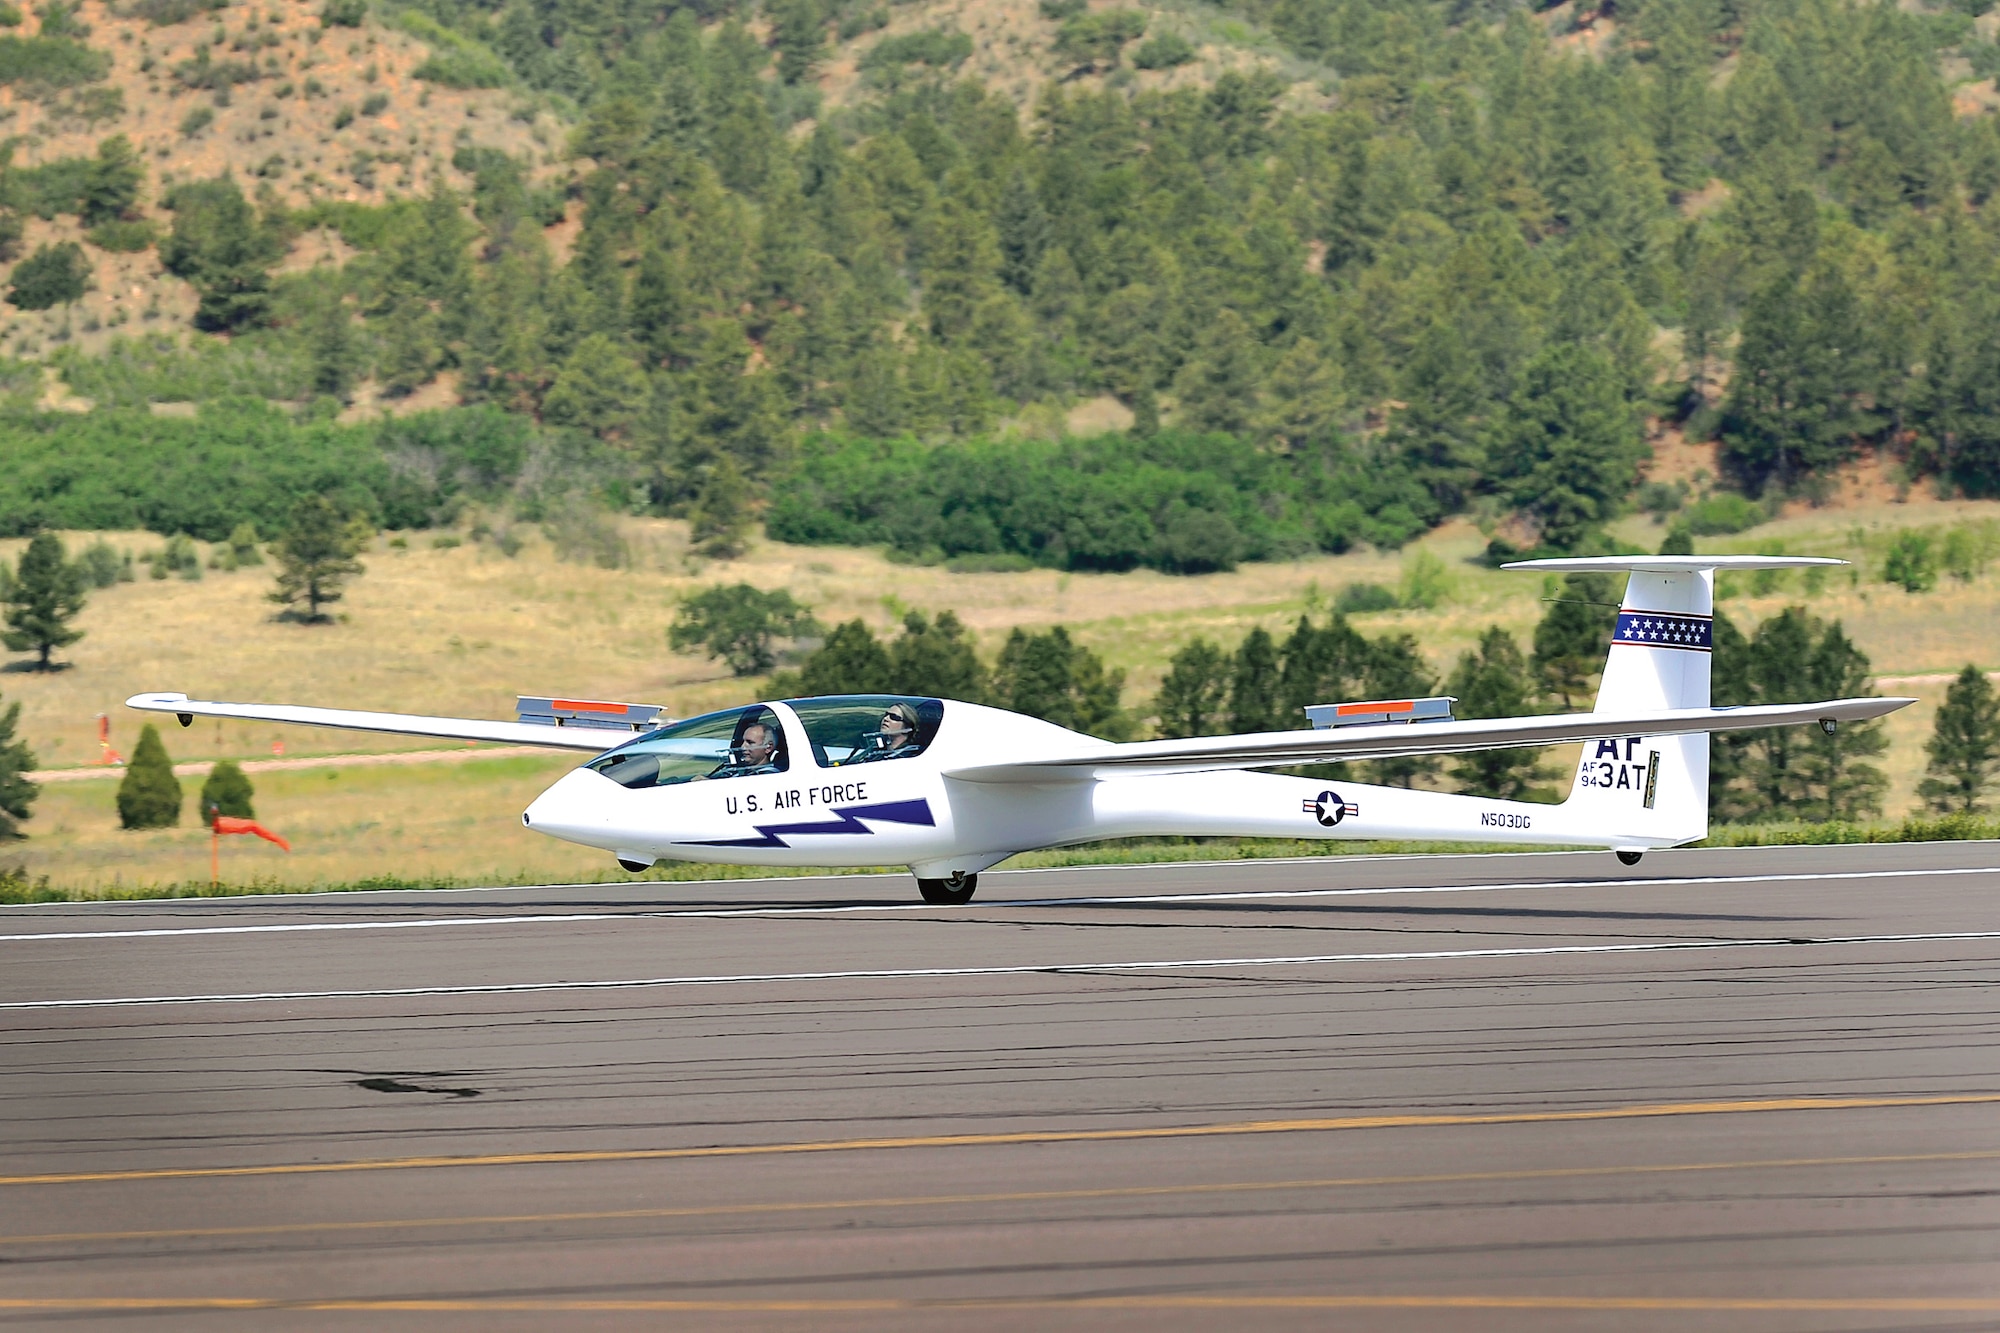 The U.S. Air Force Academy’s first TG-16A glider arrived at the Academy July 8.
The new fleet of training and aerobatic gliders is valued at $4.8 million and includes five new aerobatic gliders and 14 basic trainers. (U.S. Air Force Photo/Raymond McCoy)